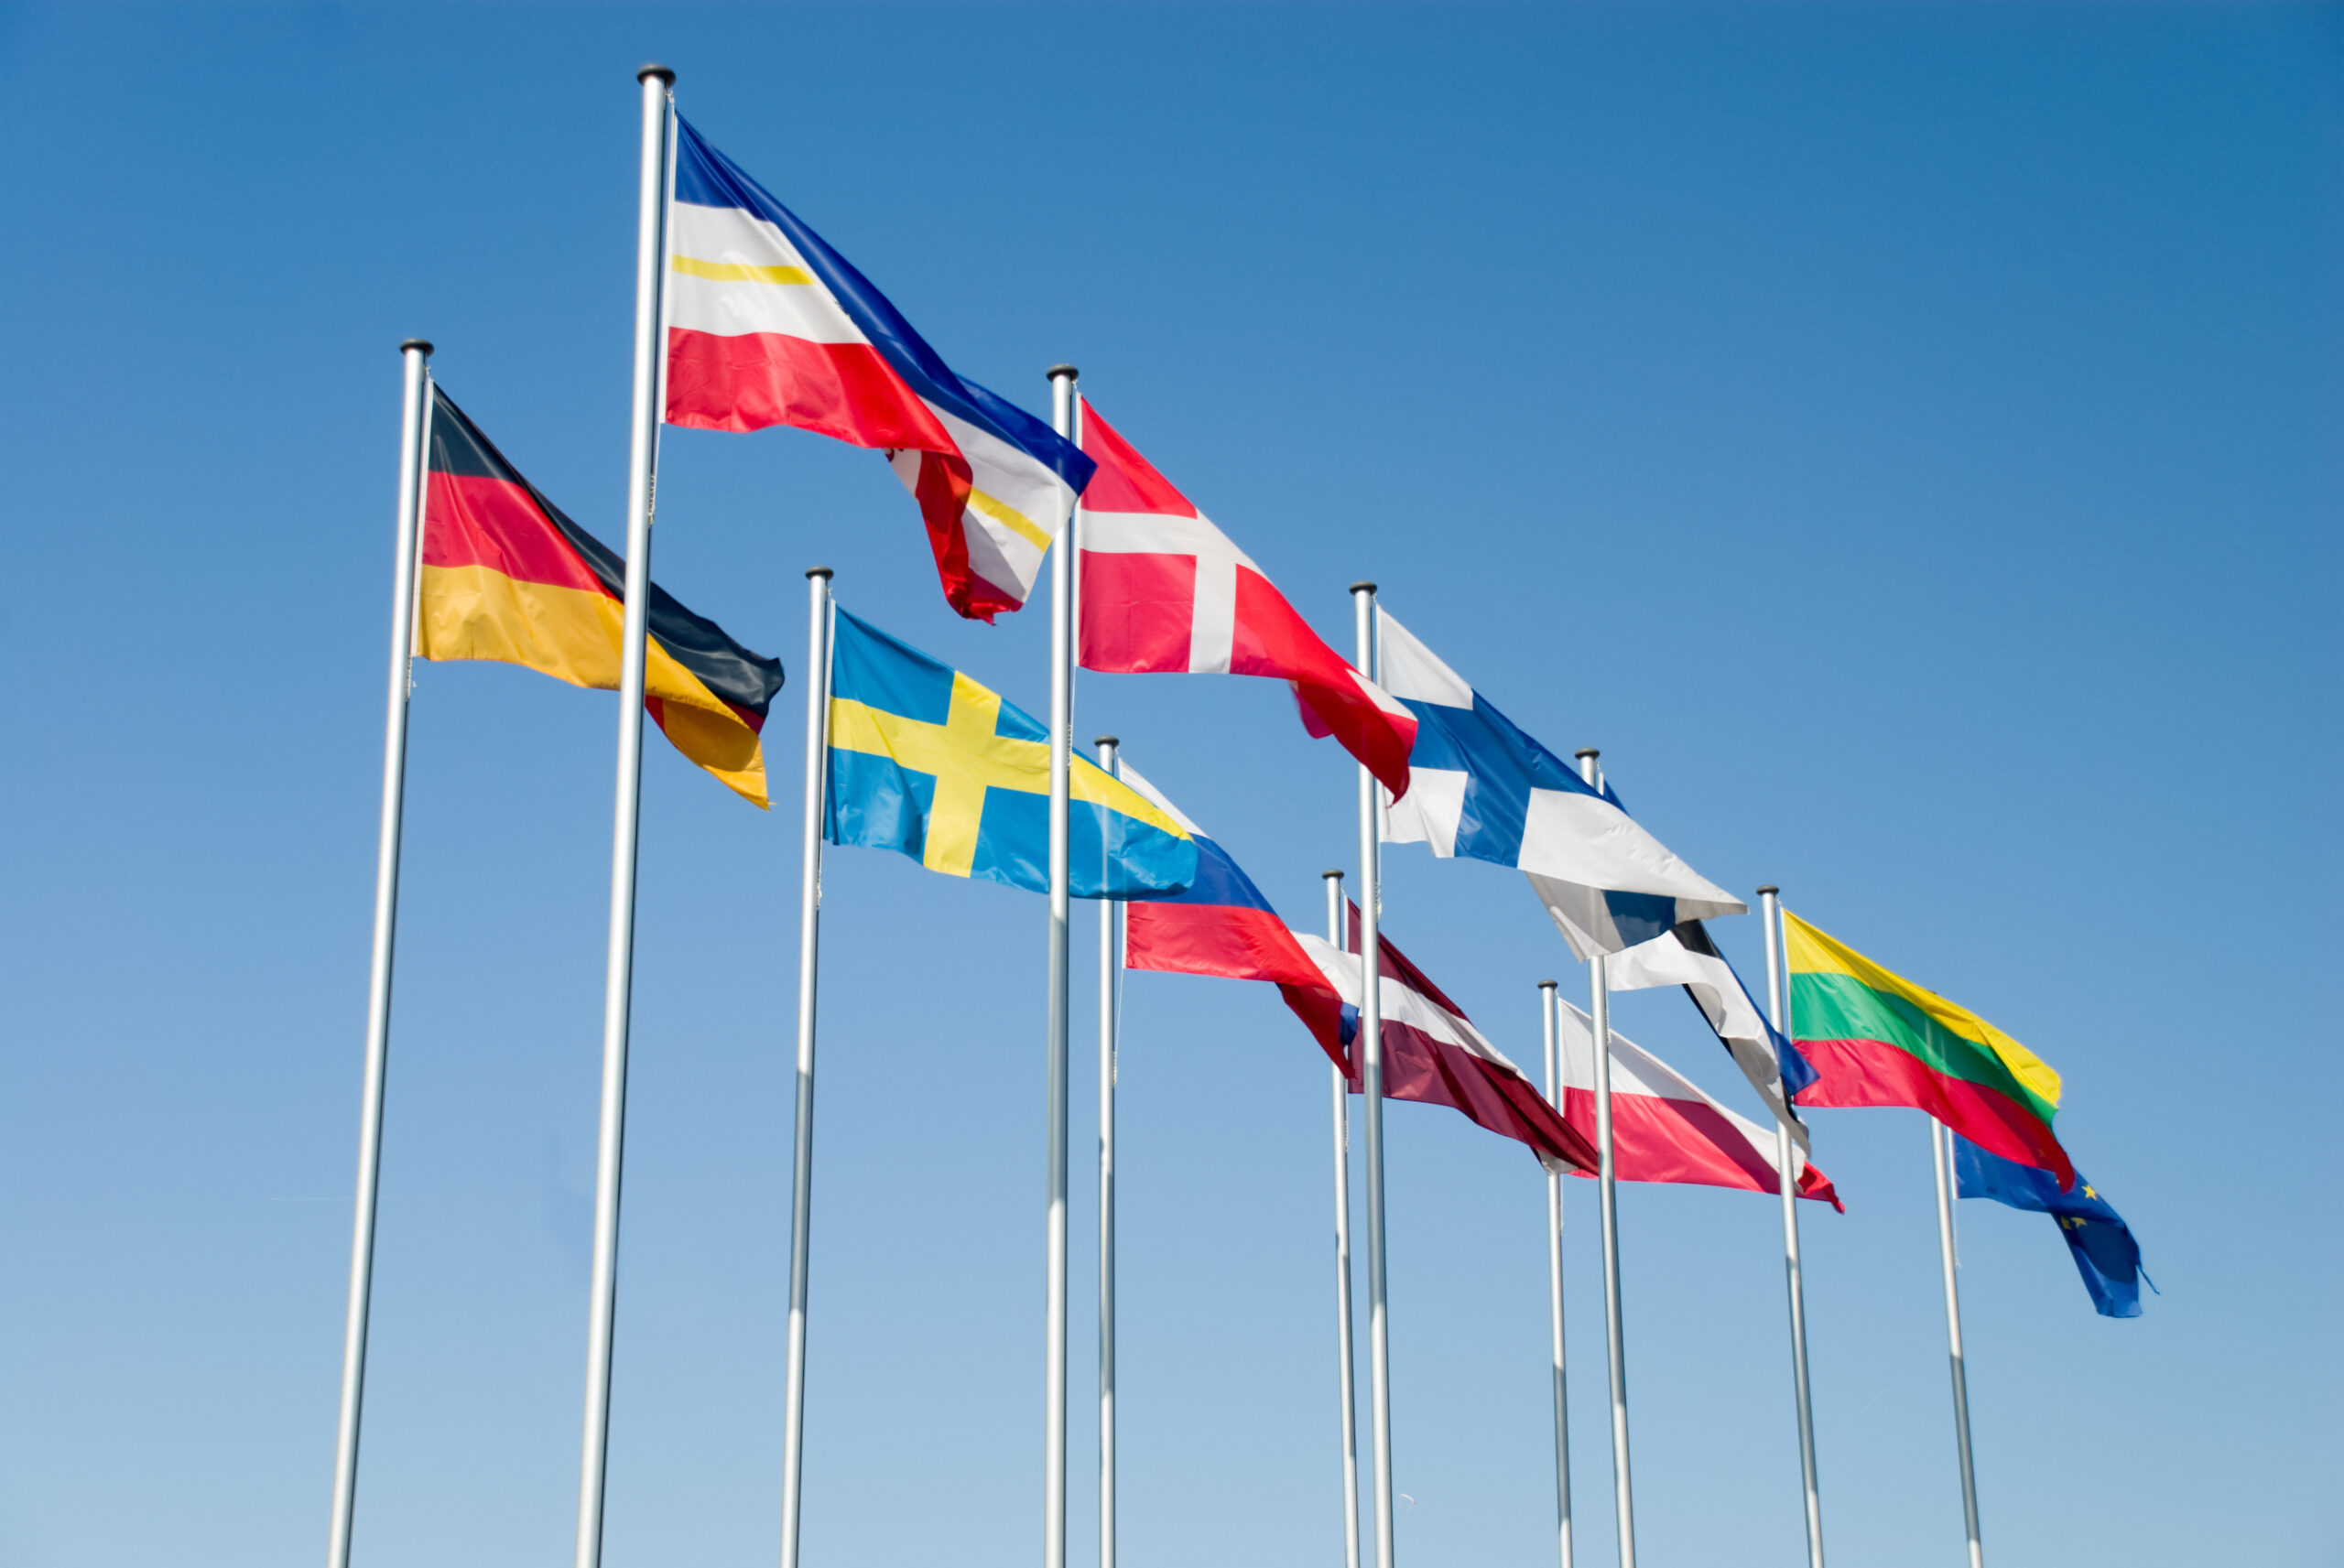 Numerous countries' flags seen flying together on poles.